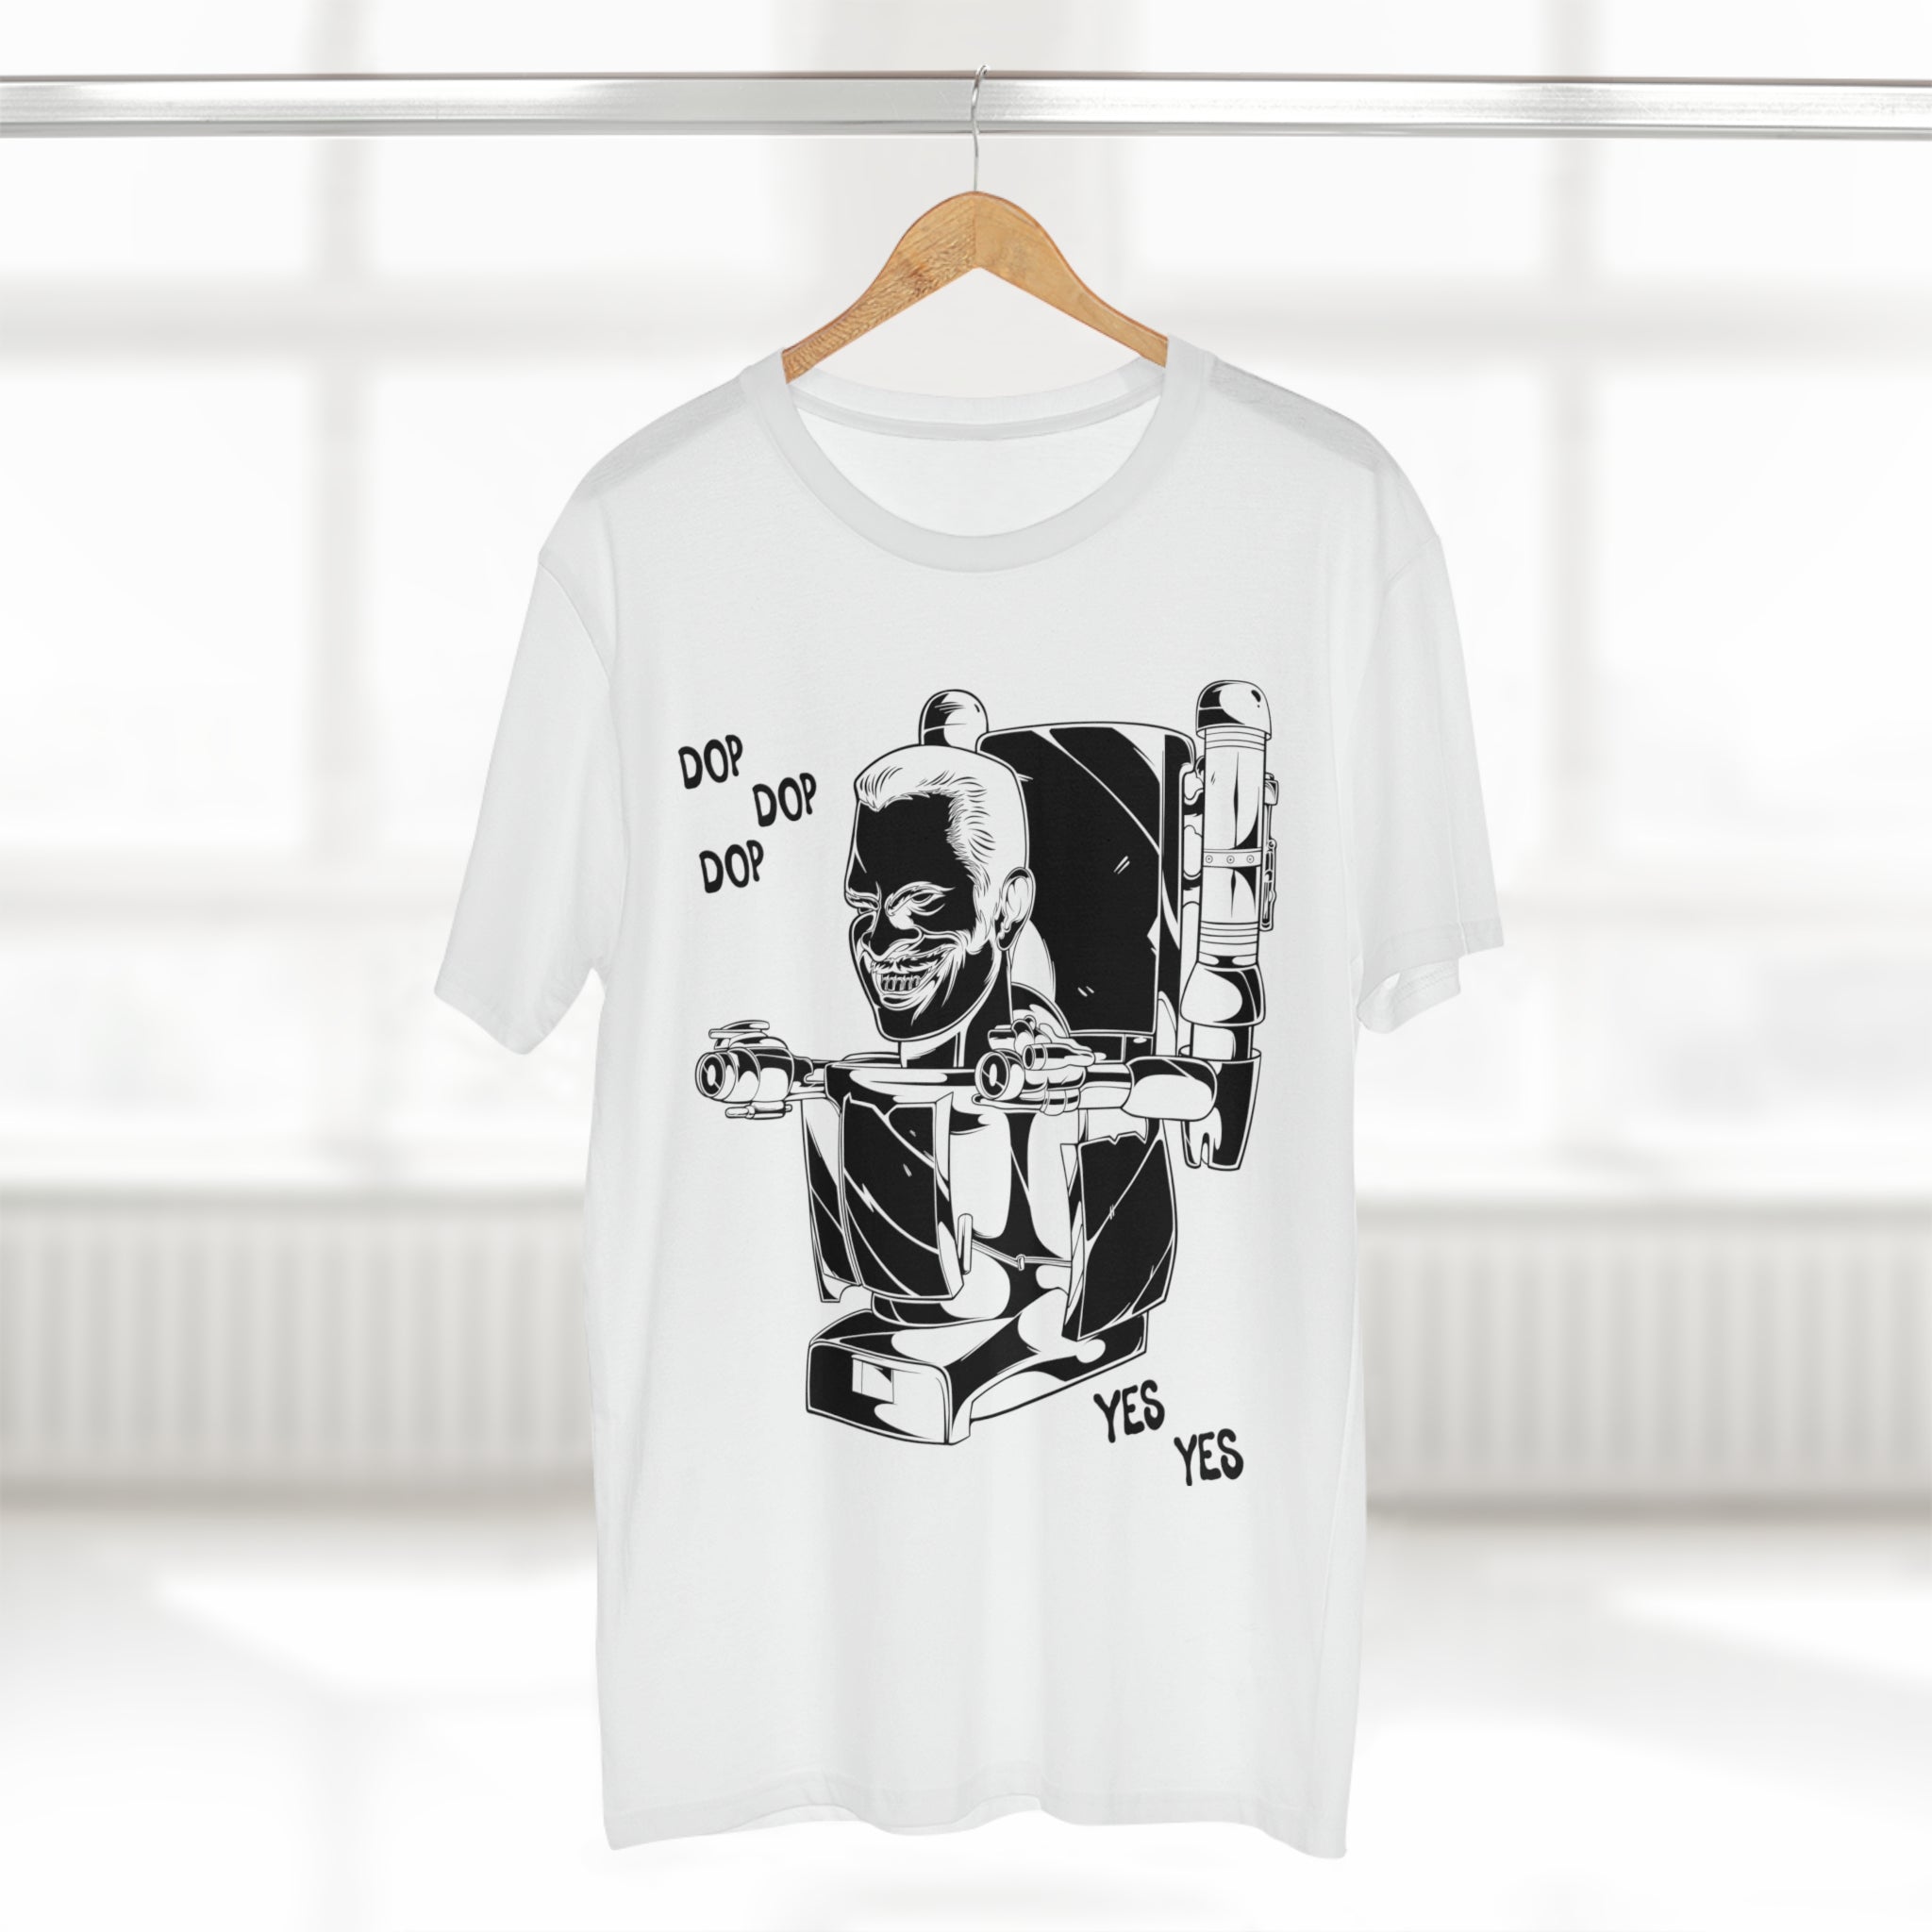 White tee with minimalistic G Man pop art on hanging in room